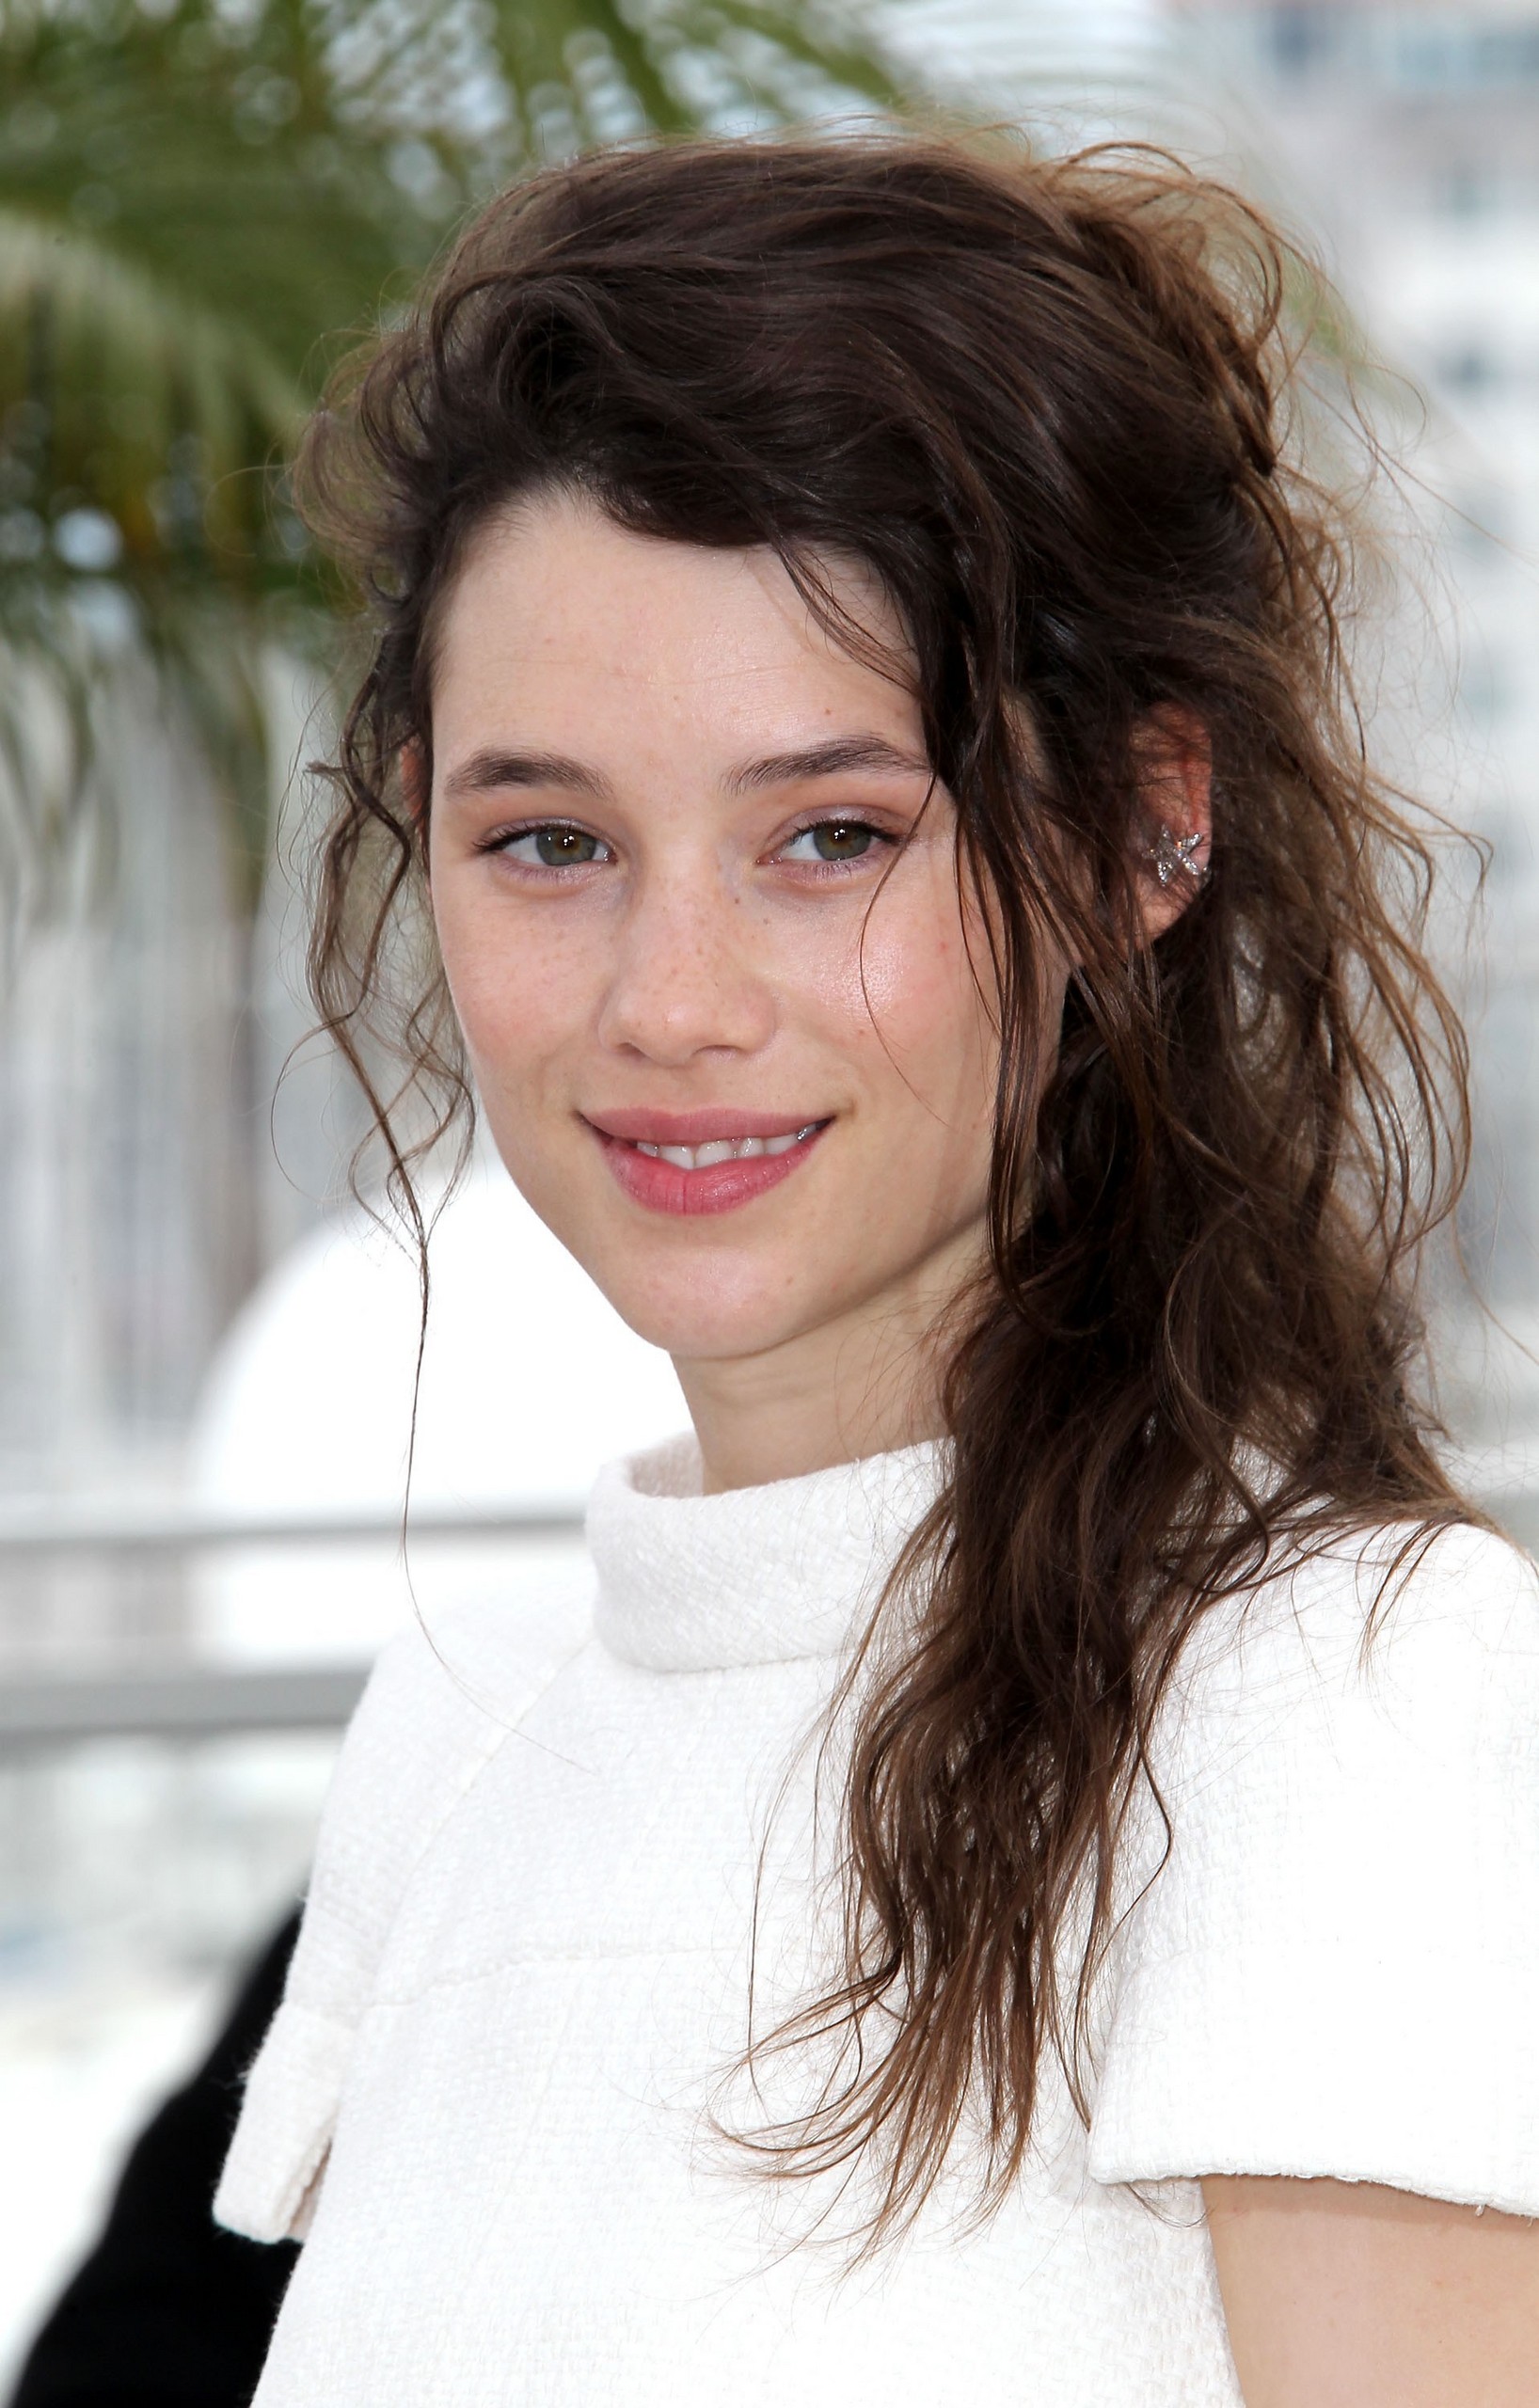 astrid berges-frisbey sexy